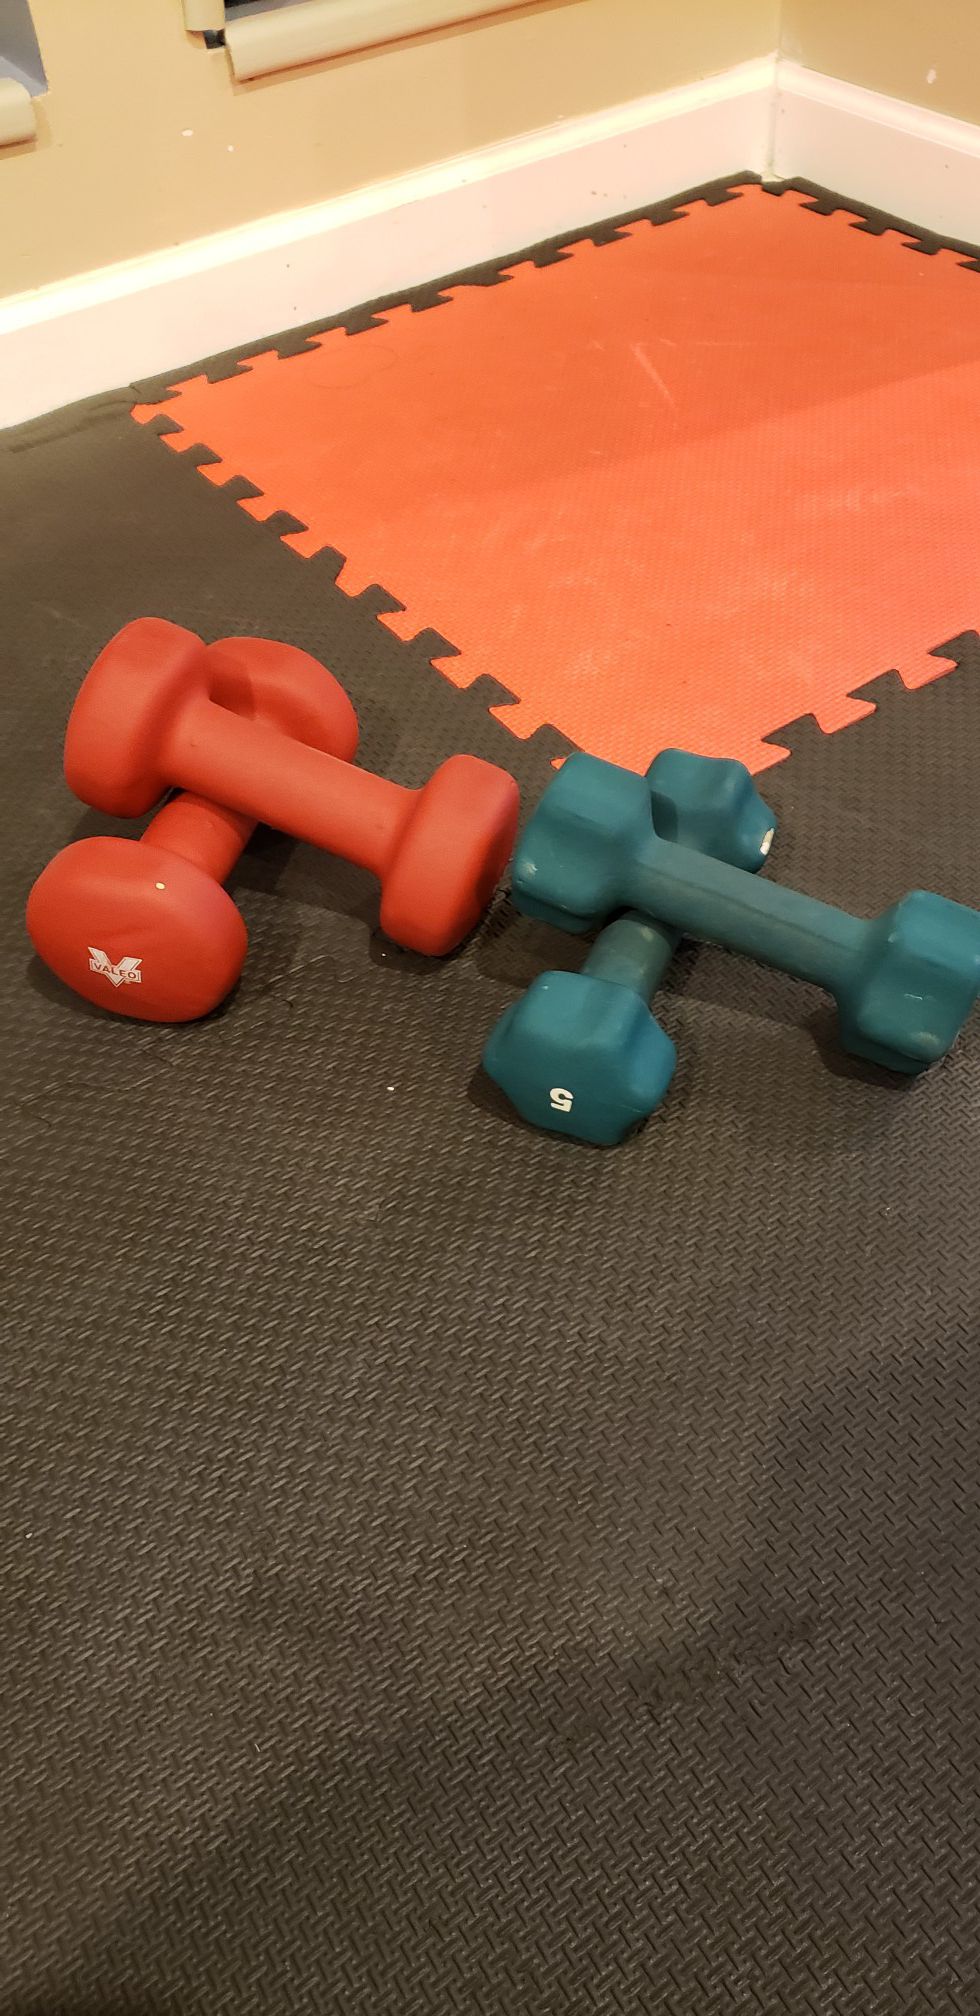 Pairs of 8 lbs and 5 lbs neoprene dumbbells